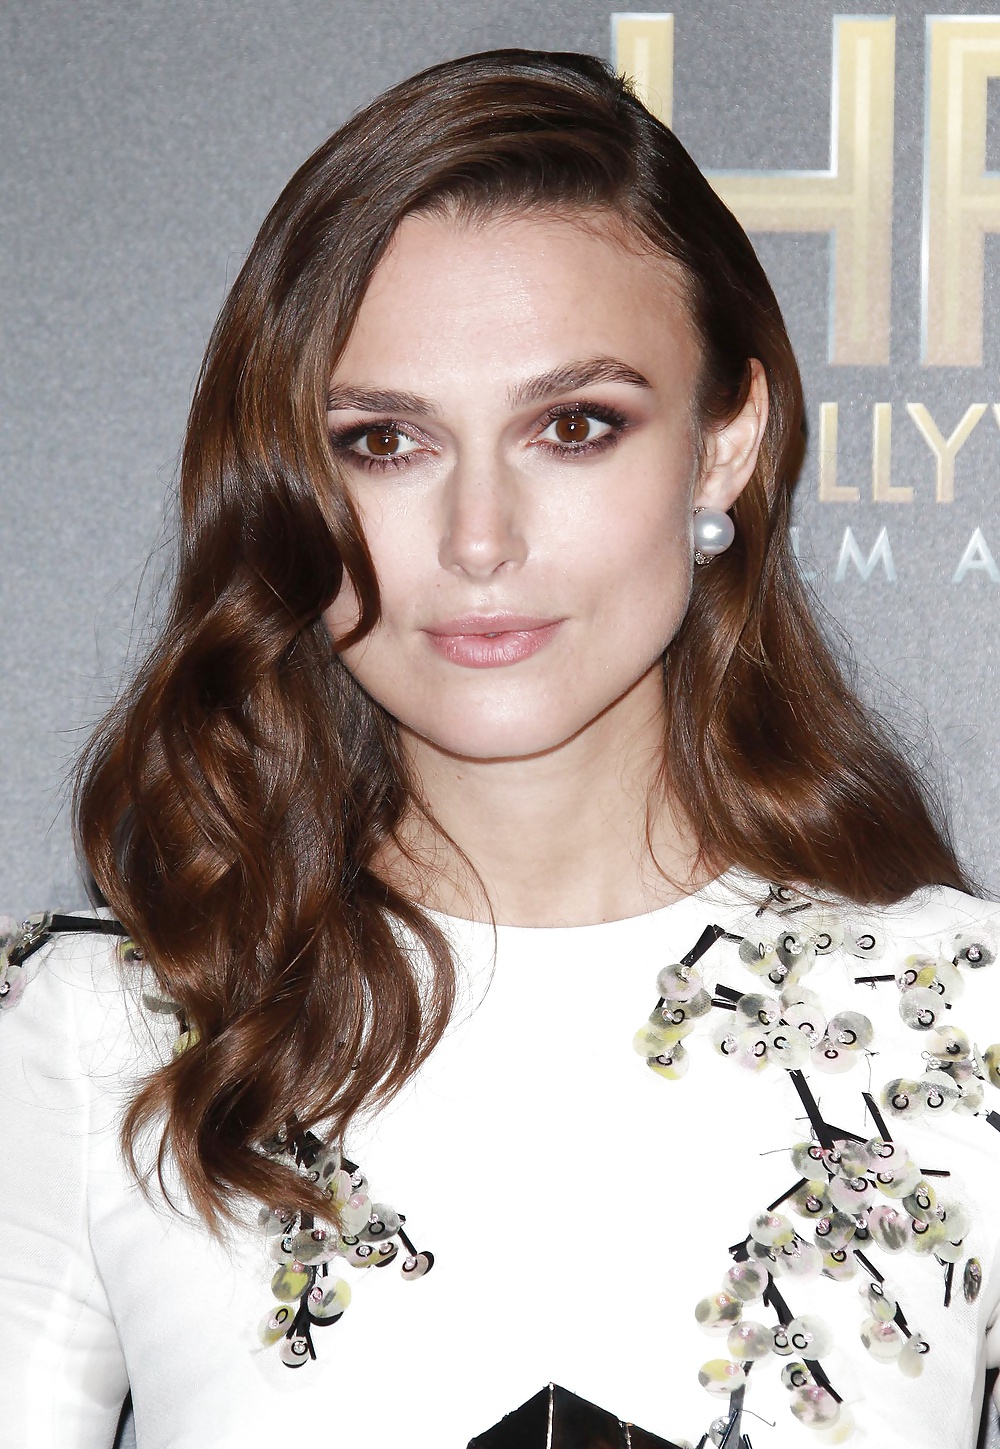 Keira Knightley The Royal Lady of England #35649388